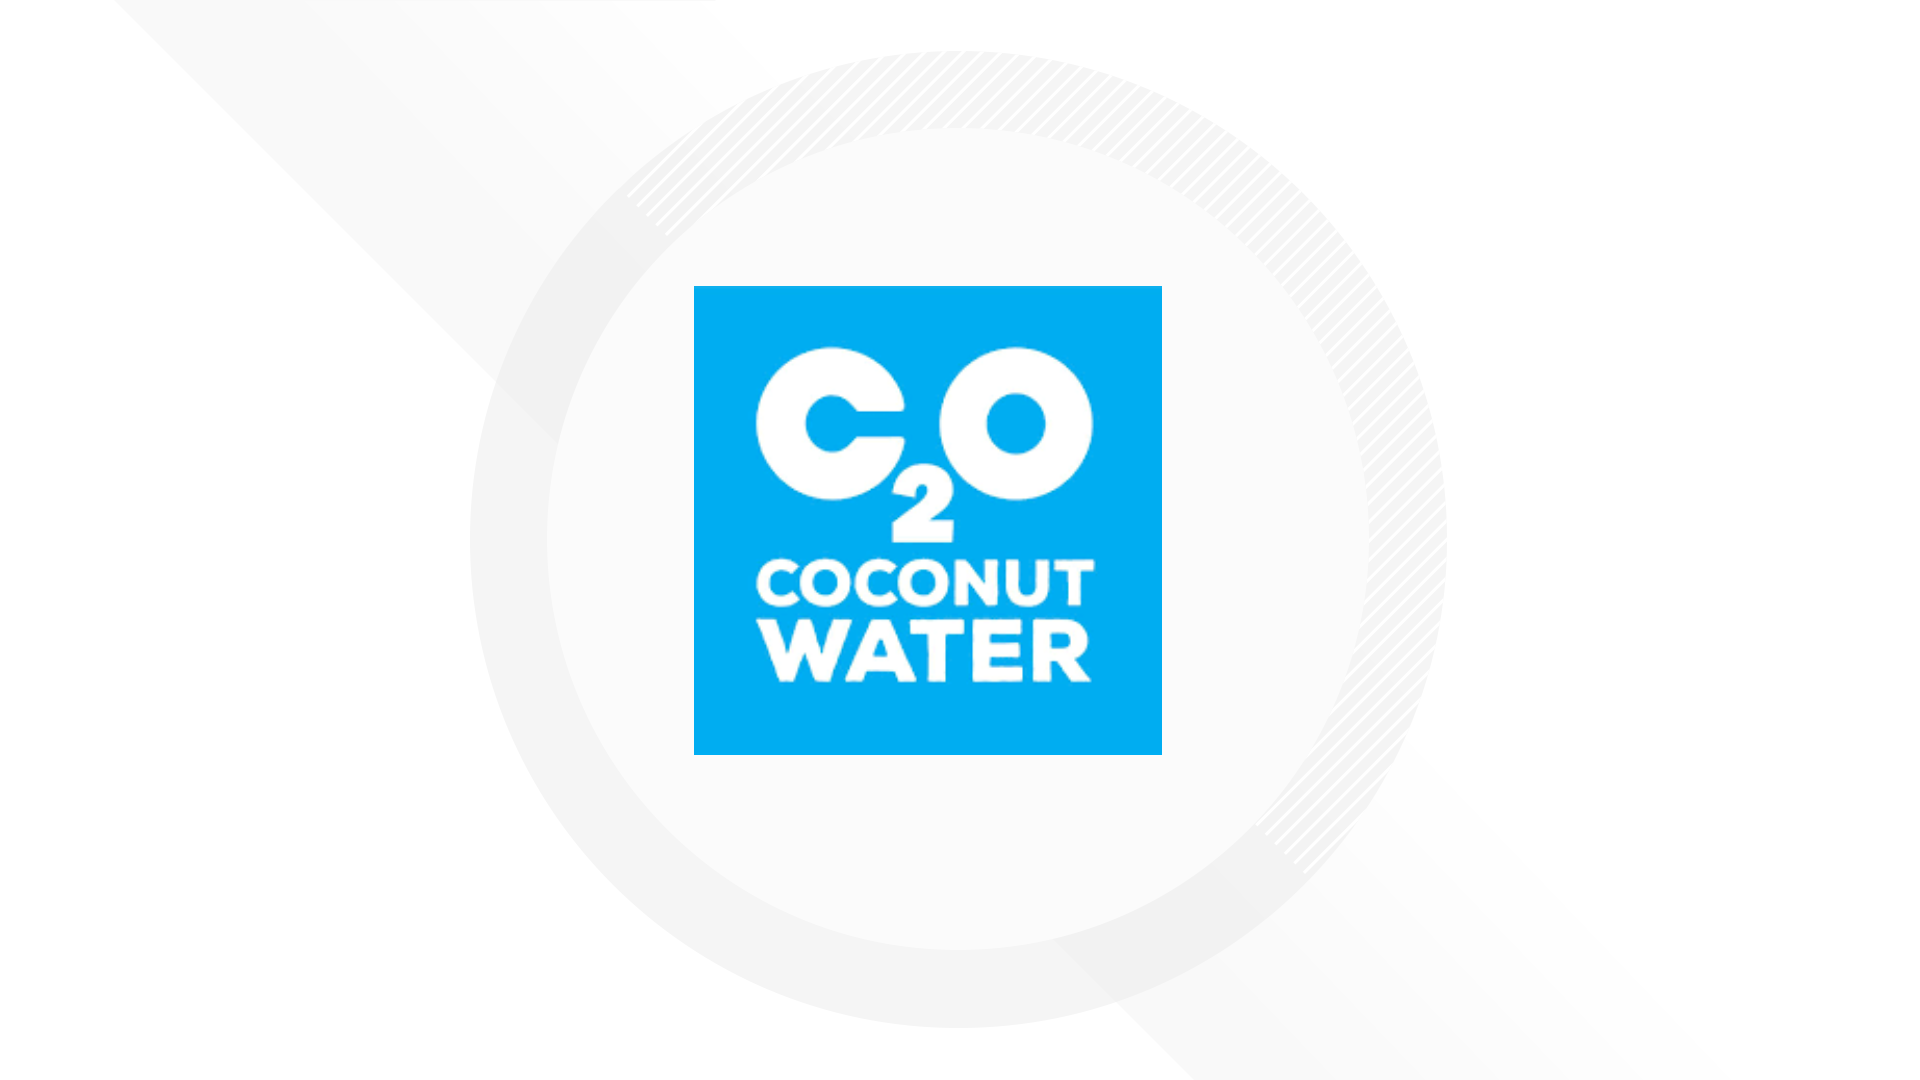 C2O is a great-tasting, natural way to hydrate. It’s pure coconut water, single-sourced, nothing artificial and never from concentrate. Don’t just hydrate, rejuvenate with C2O! You can find it at King Soopers, your home for Optimum Wellness. Find recipes at www.DrinkC2O.com. 
THIS INTERVIEW HAS COMMERCIAL CONTENT. PRODUCTS AND SERVICES FEATURED APPEAR AS PAID ADVERTISING.